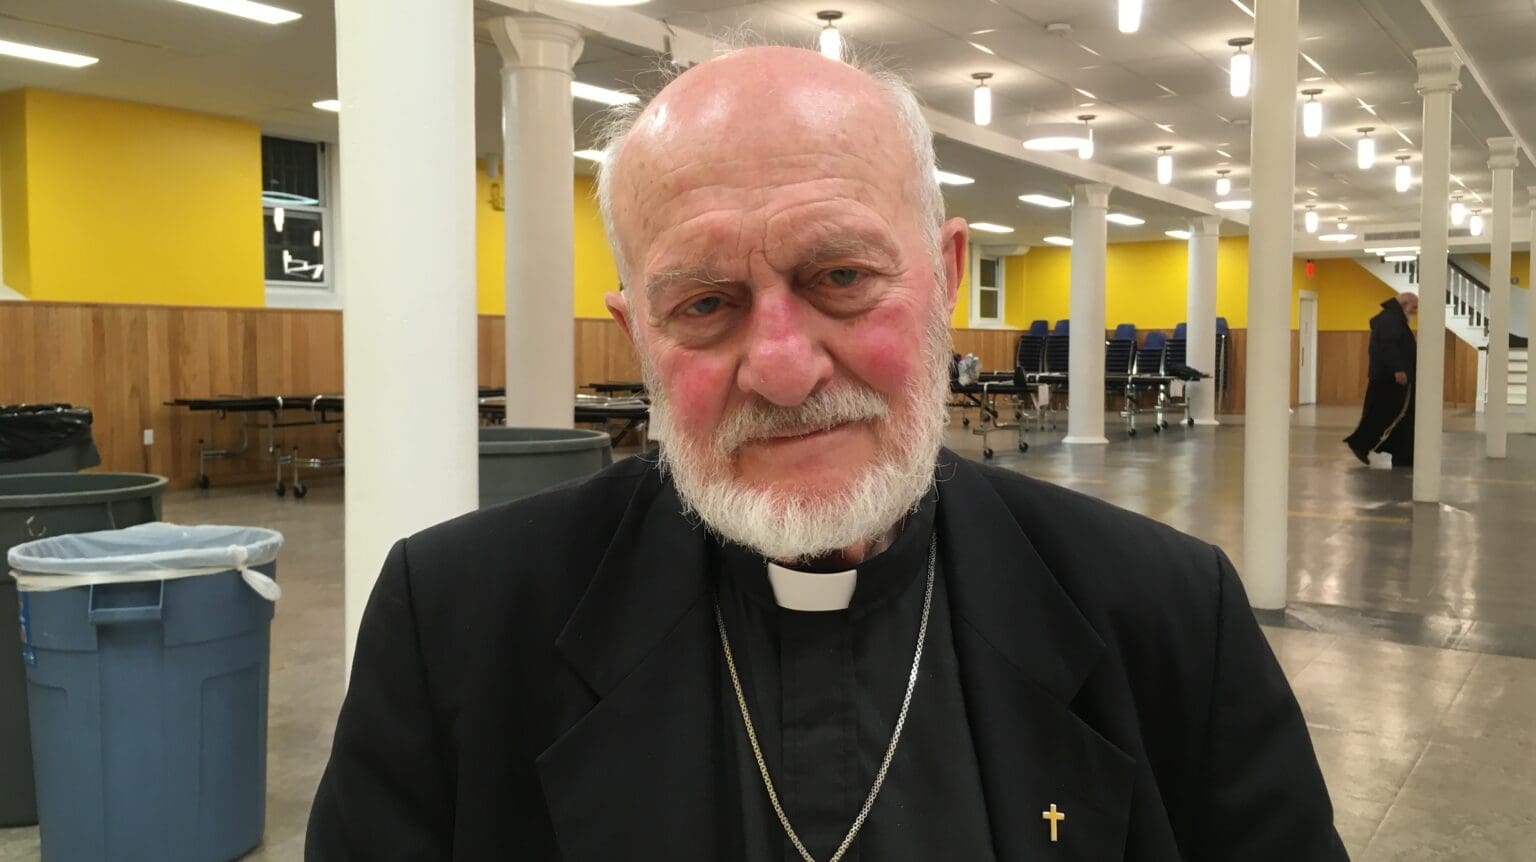 ‘I decided to become a priest as an act of defiance’ — An Interview with Fr Iván Csete, the Only Hungarian Priest in New York State